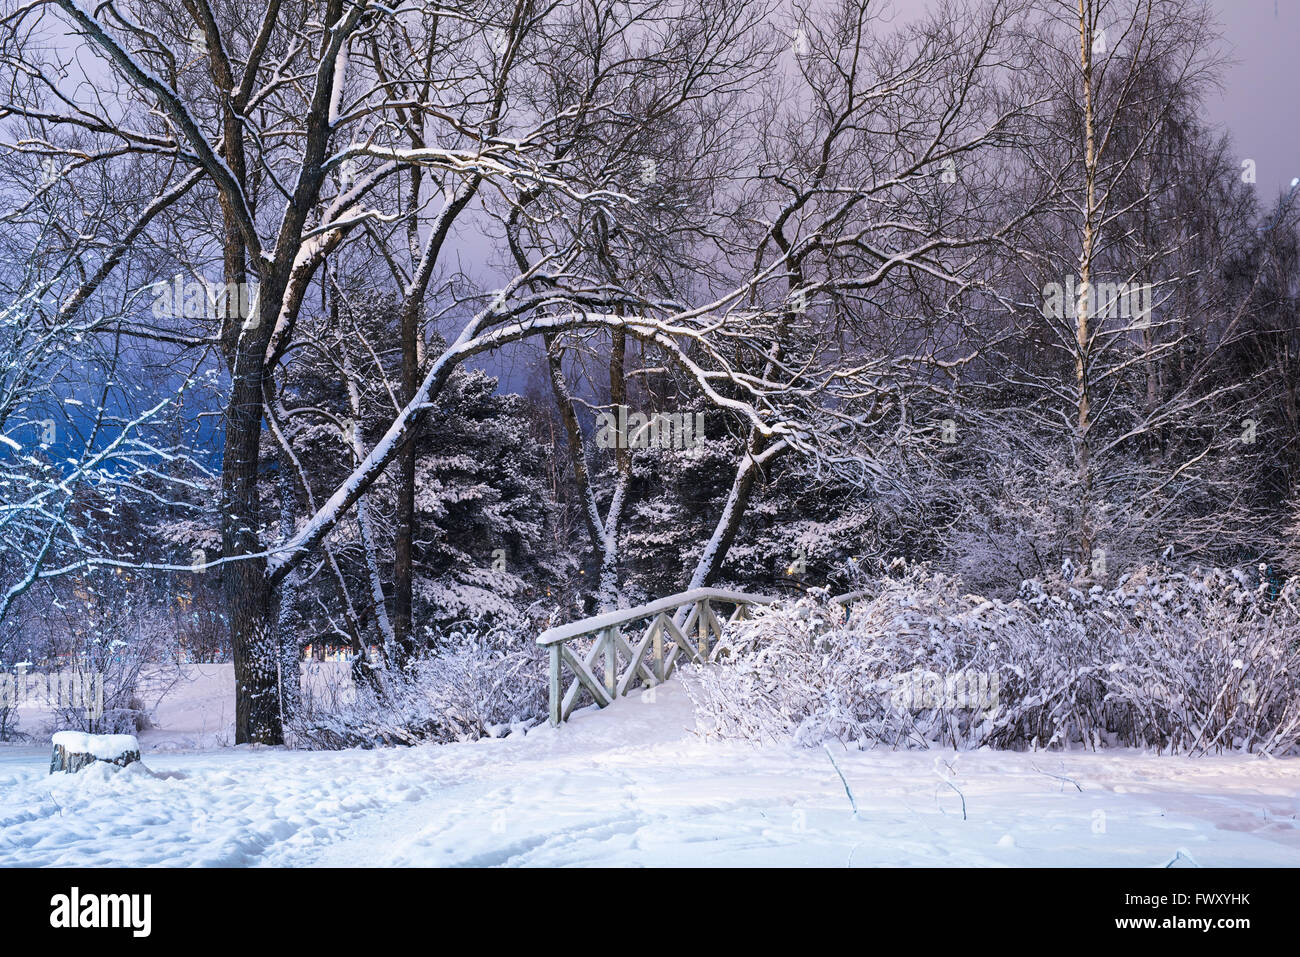 Finland, Pirkanmaa, Tampere, Winter scene with trees and footbridge covered with snow Stock Photo